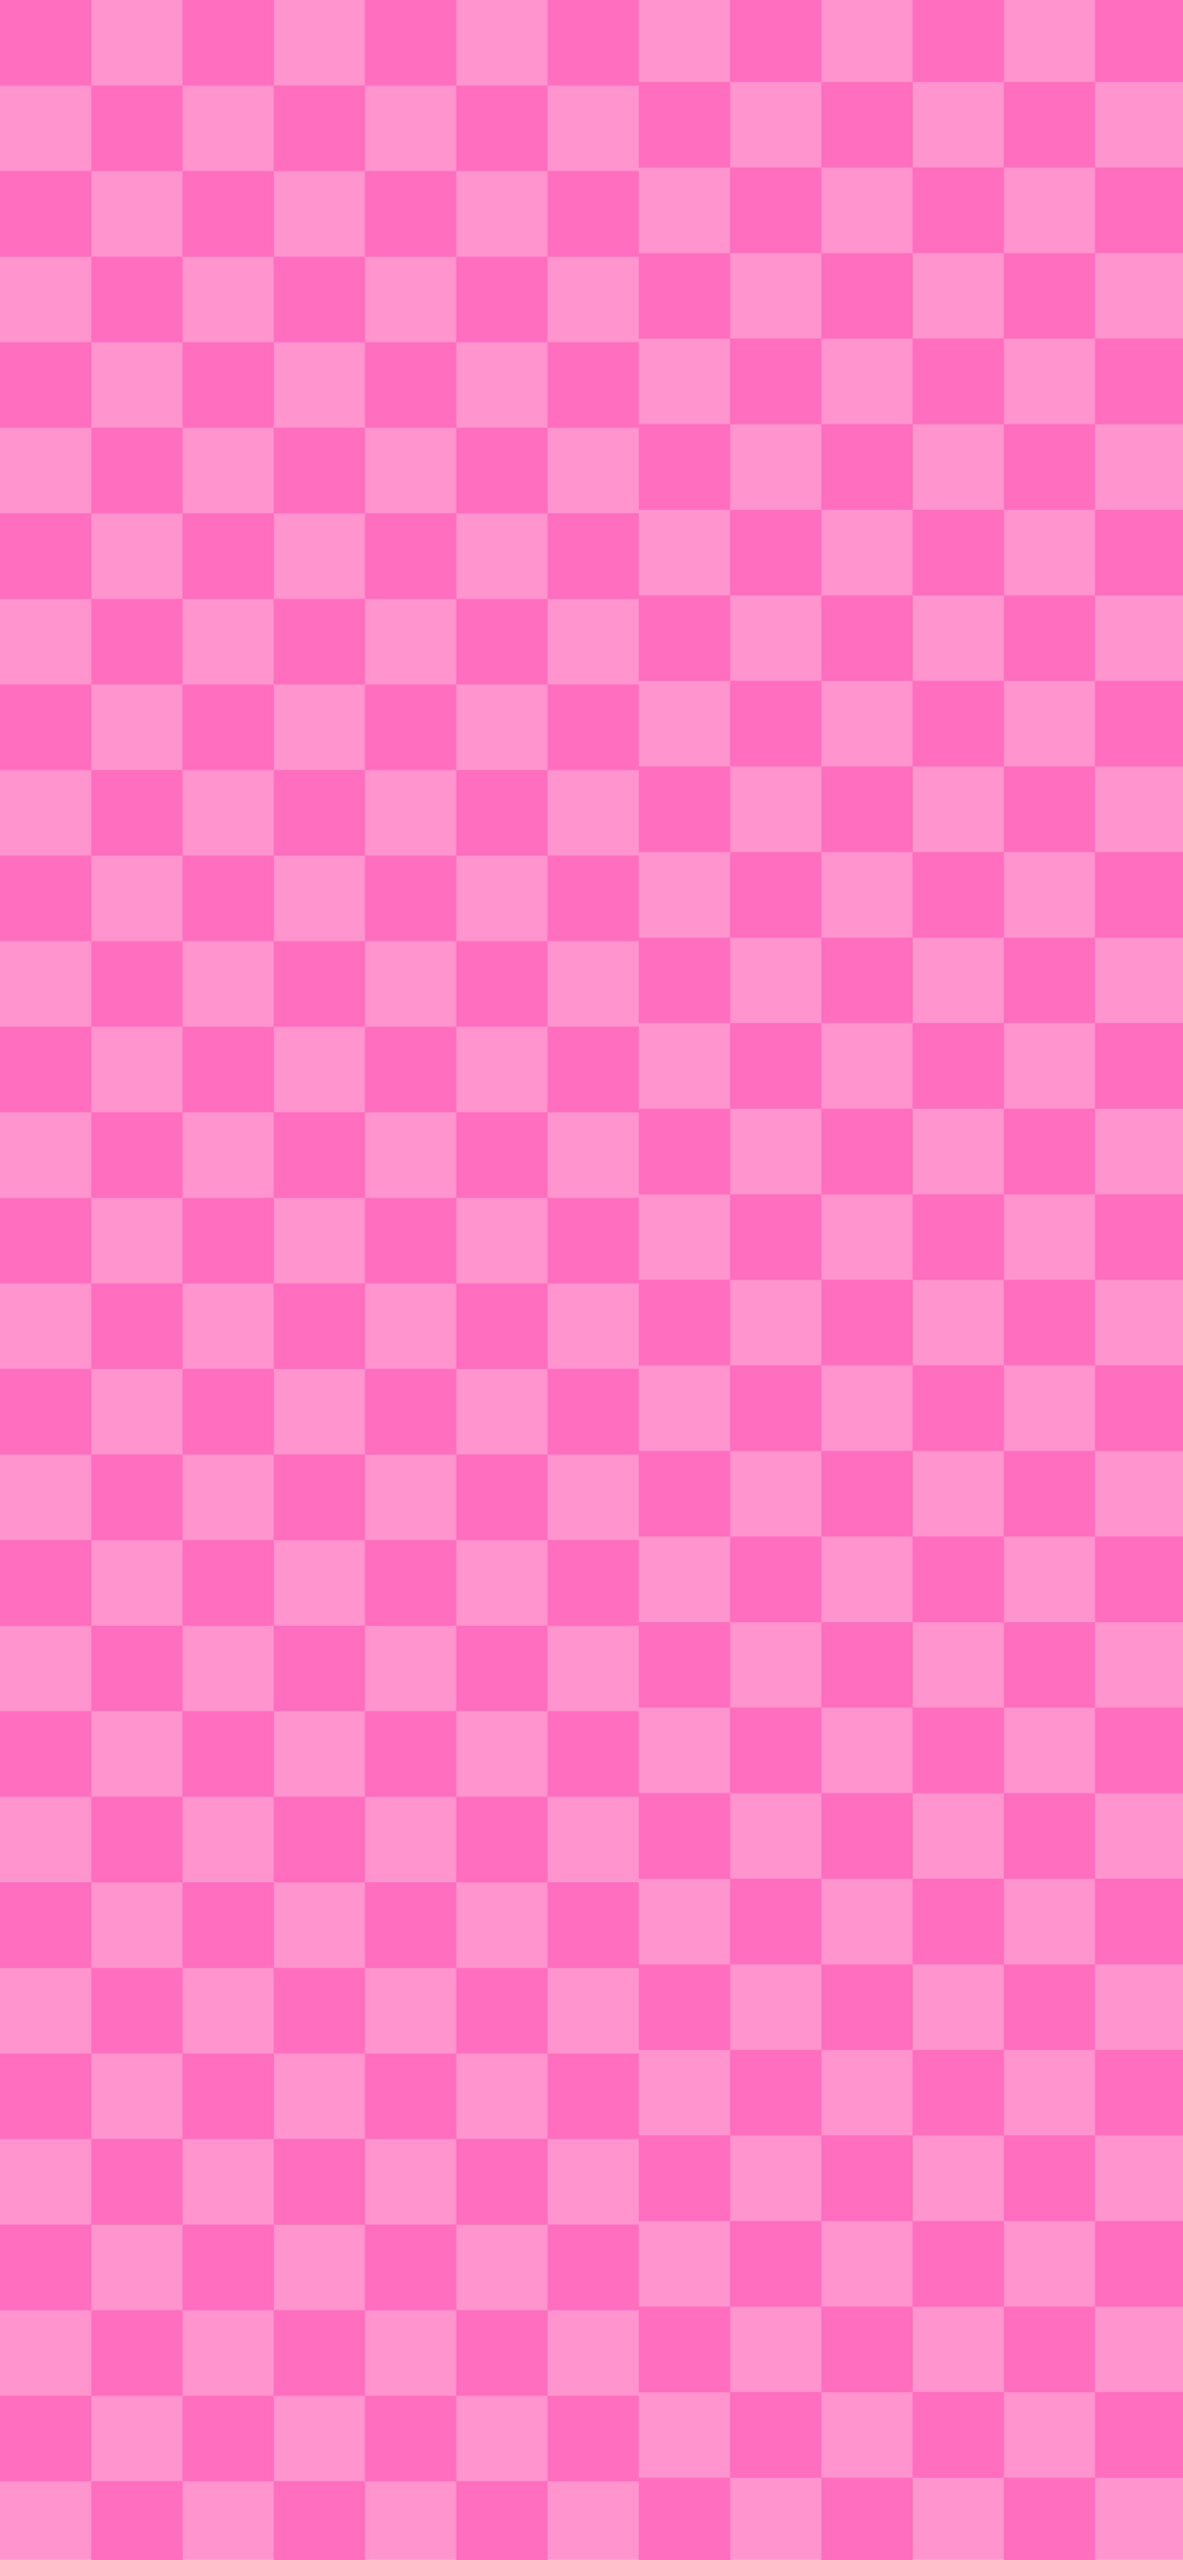 checkerboard and pink background